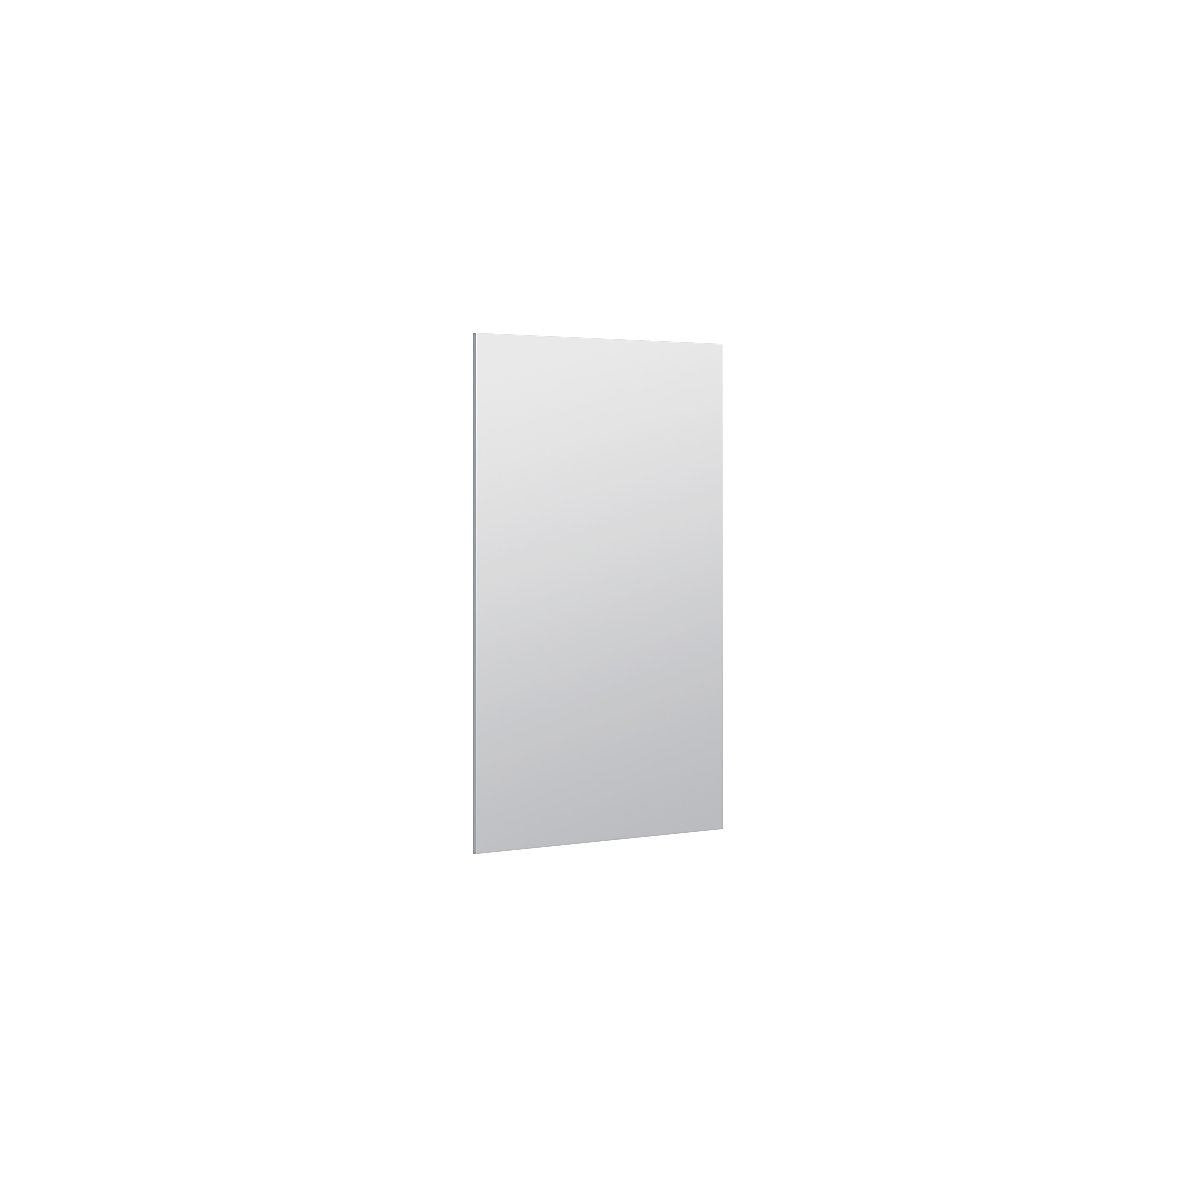 Rear panel for open wardrobe section – Wolf, light grey RAL 7035, WxH 870 x 1800 mm-1